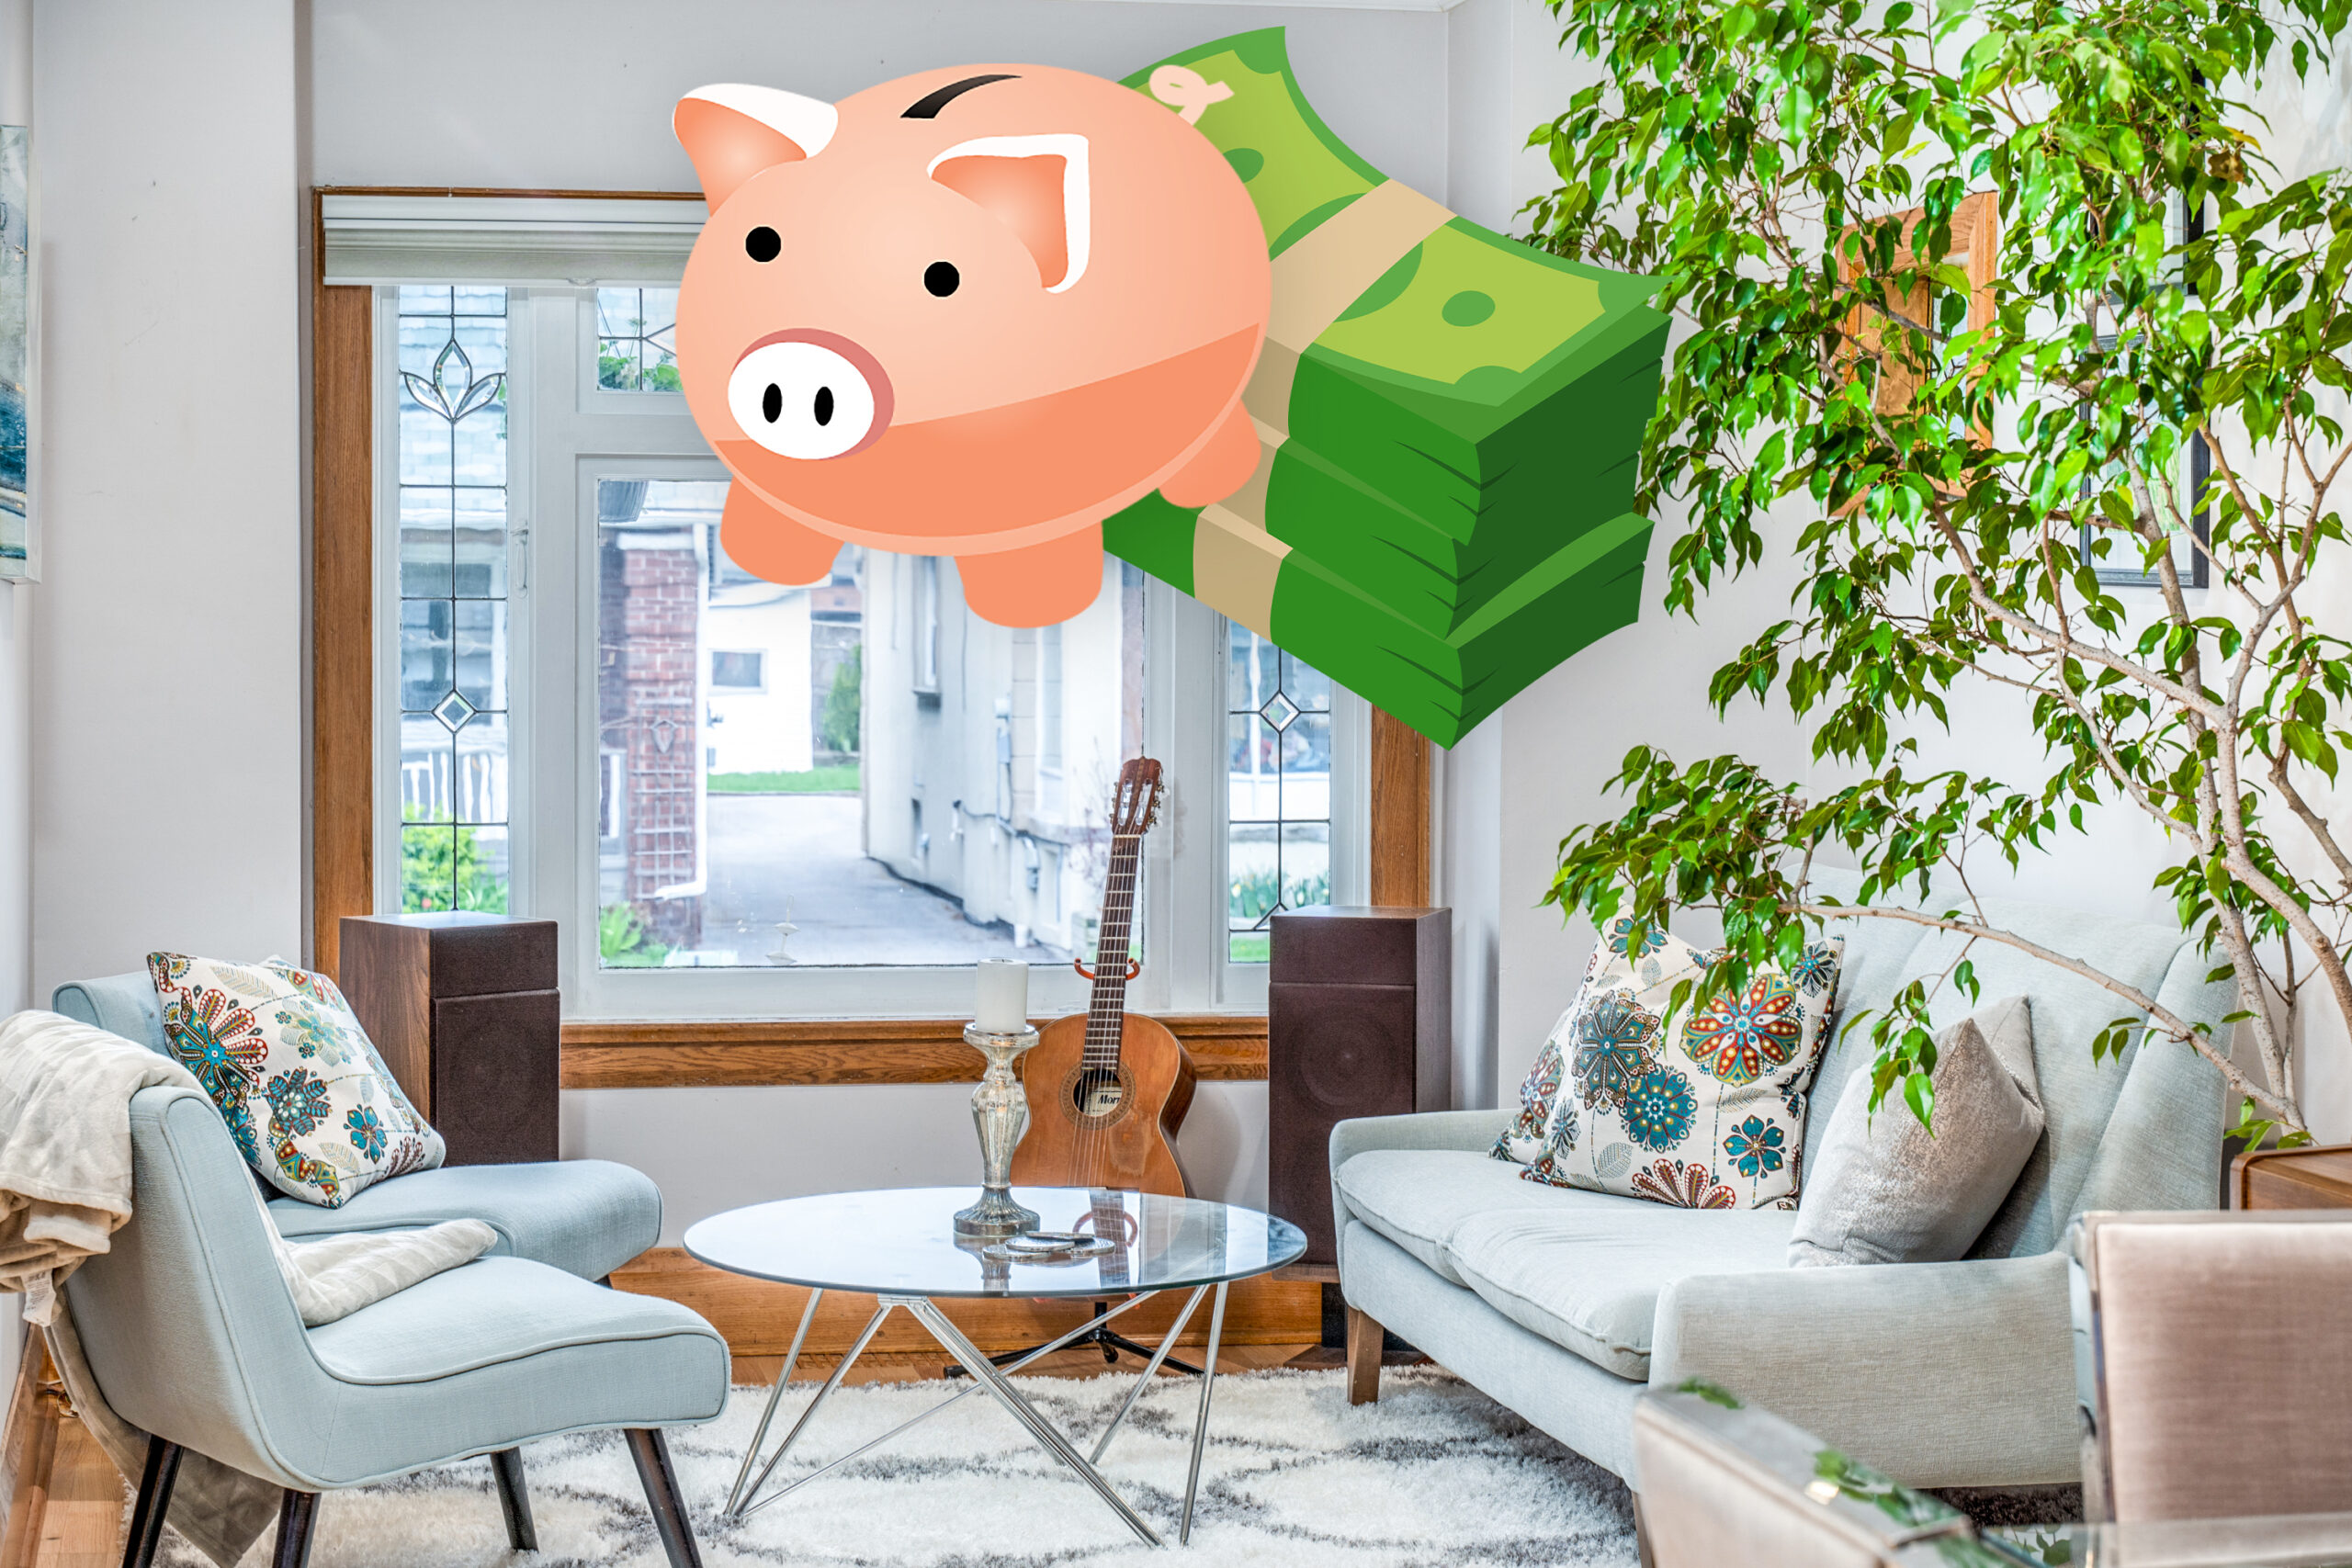 10 Ways to Get More Moolah From Your Home